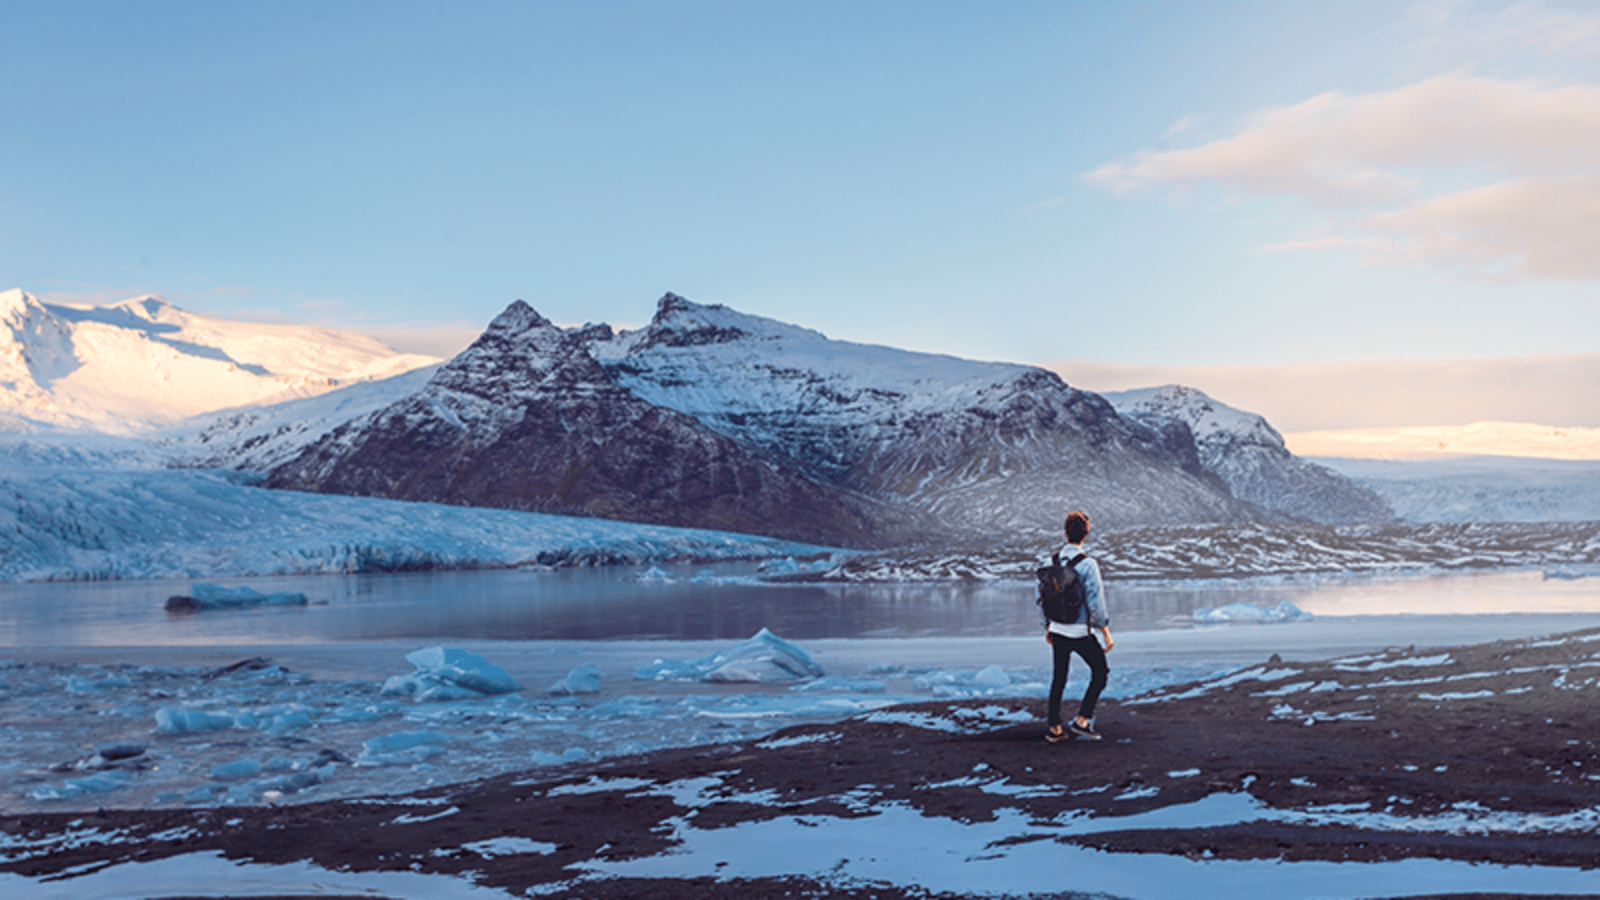 Reykjavik's snow-covered mountains and ice-flows